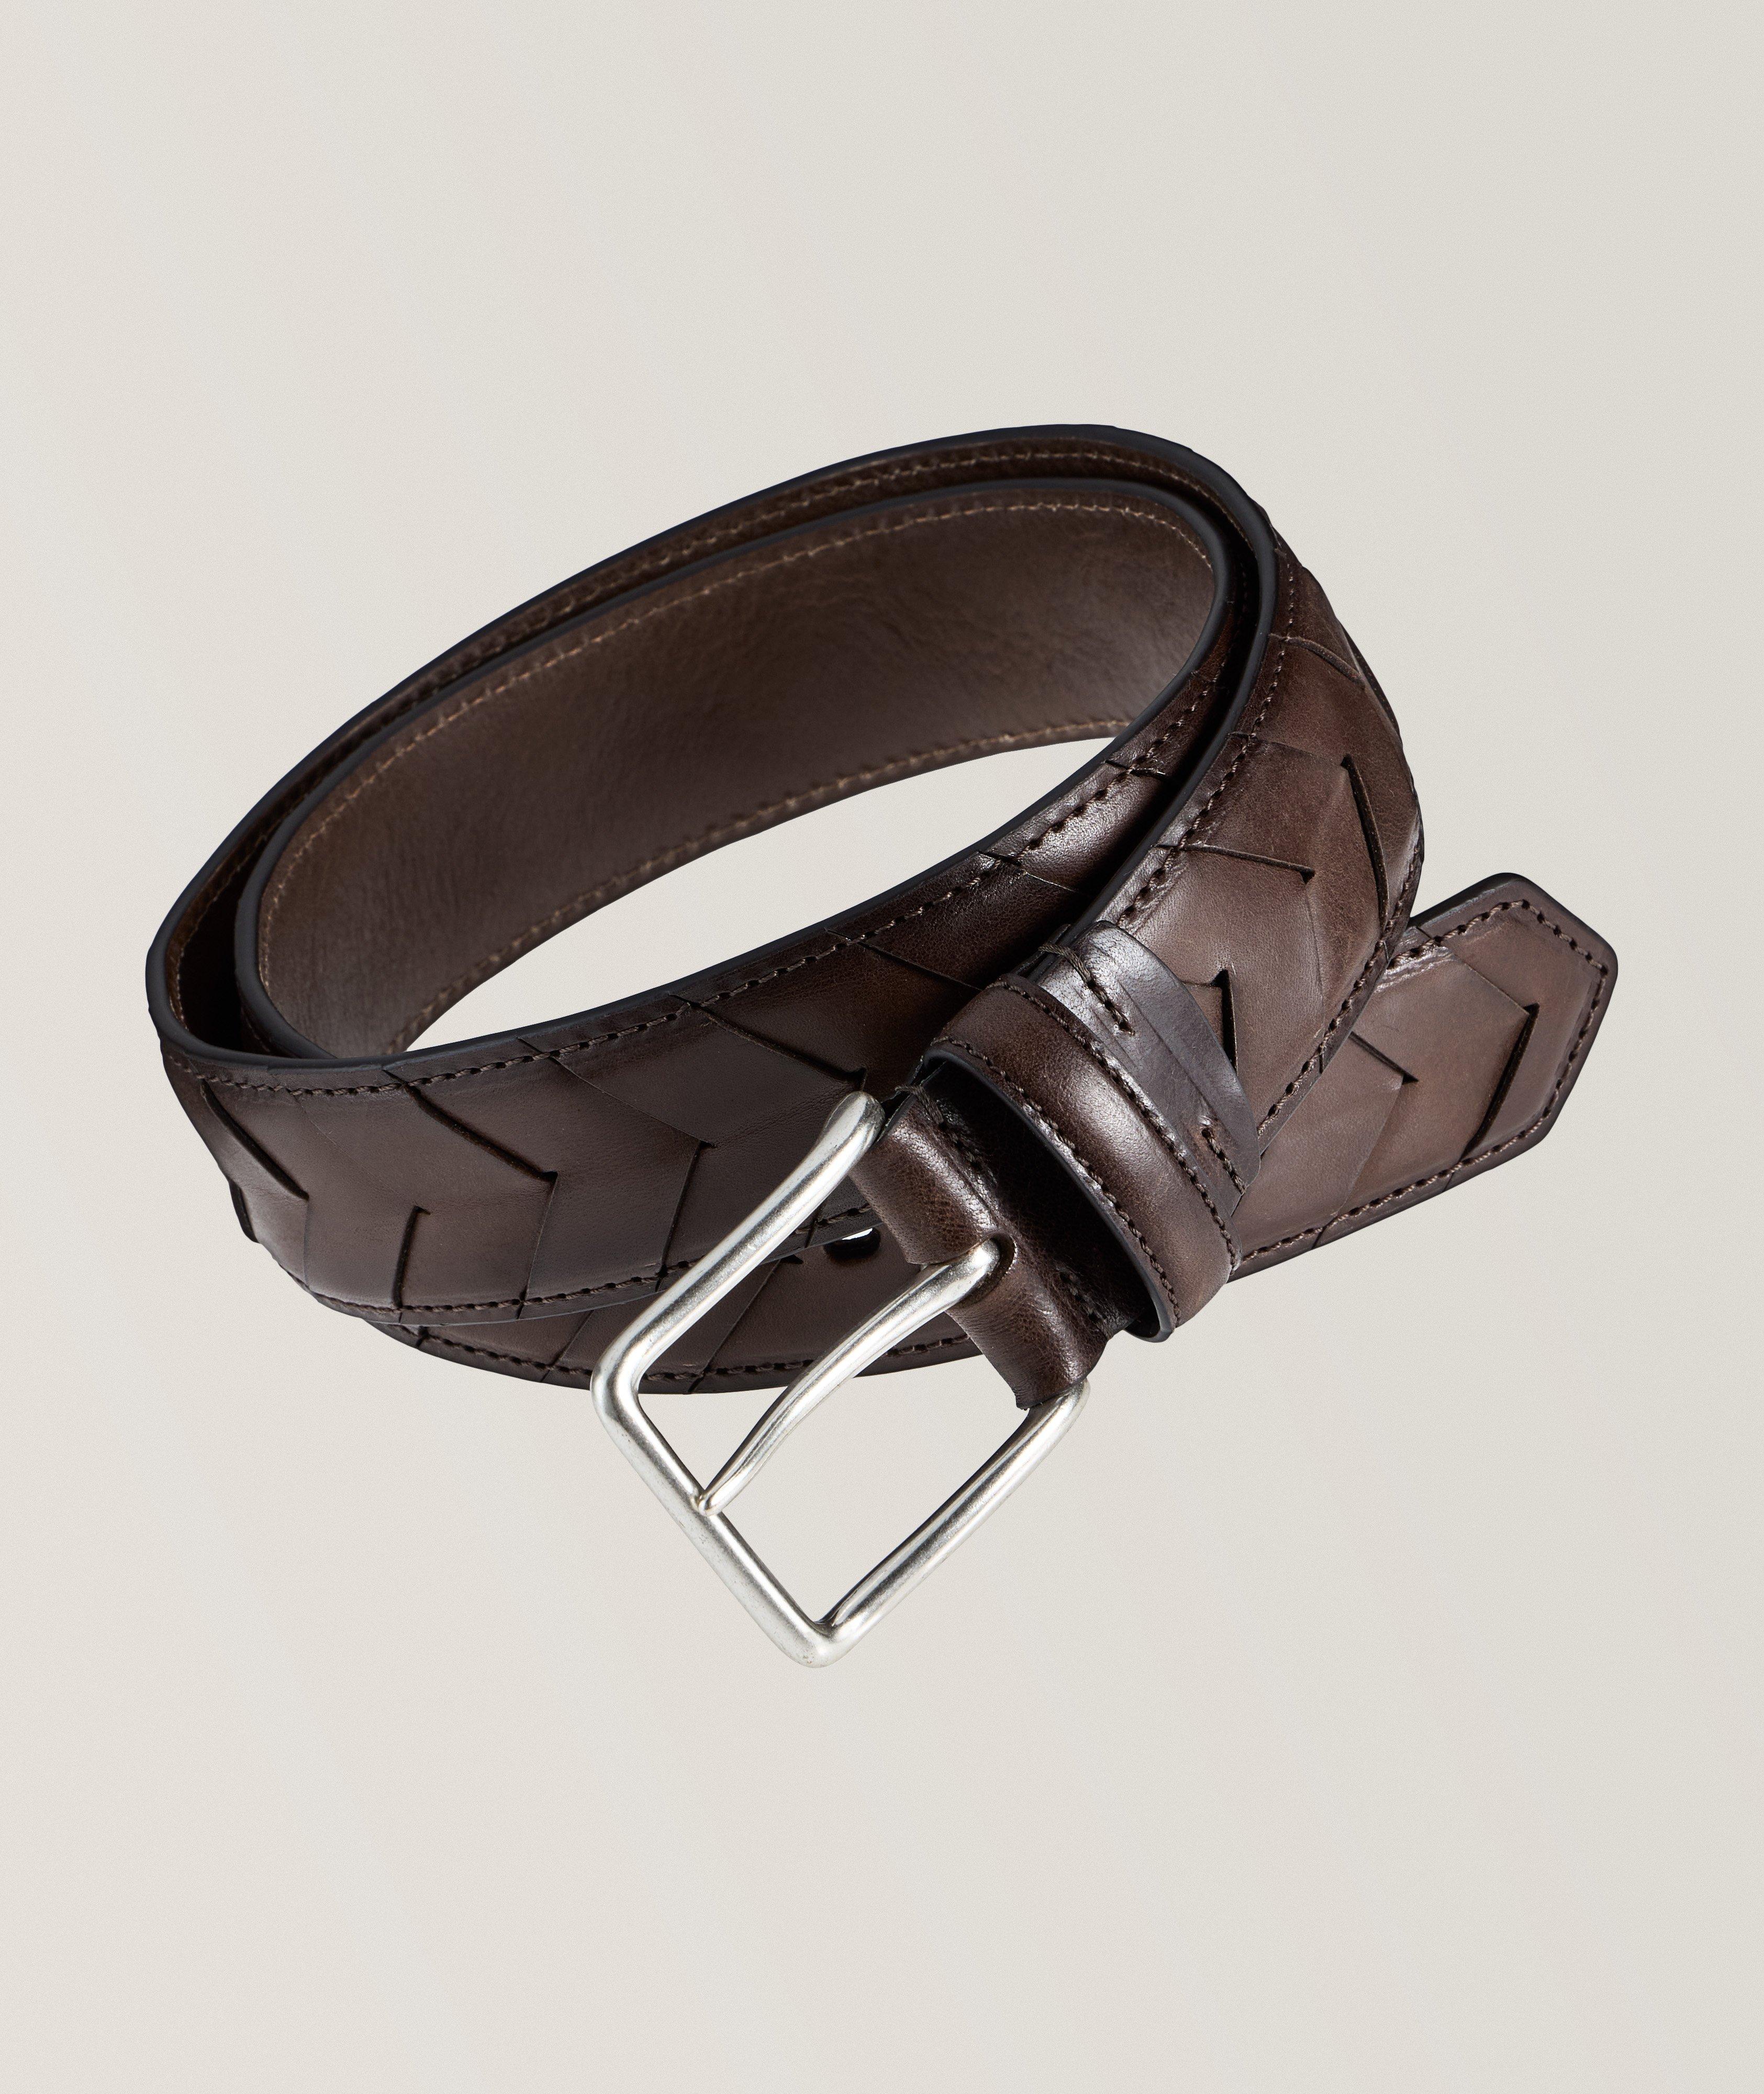 Woven Leather Pin-Buckle Belt image 0